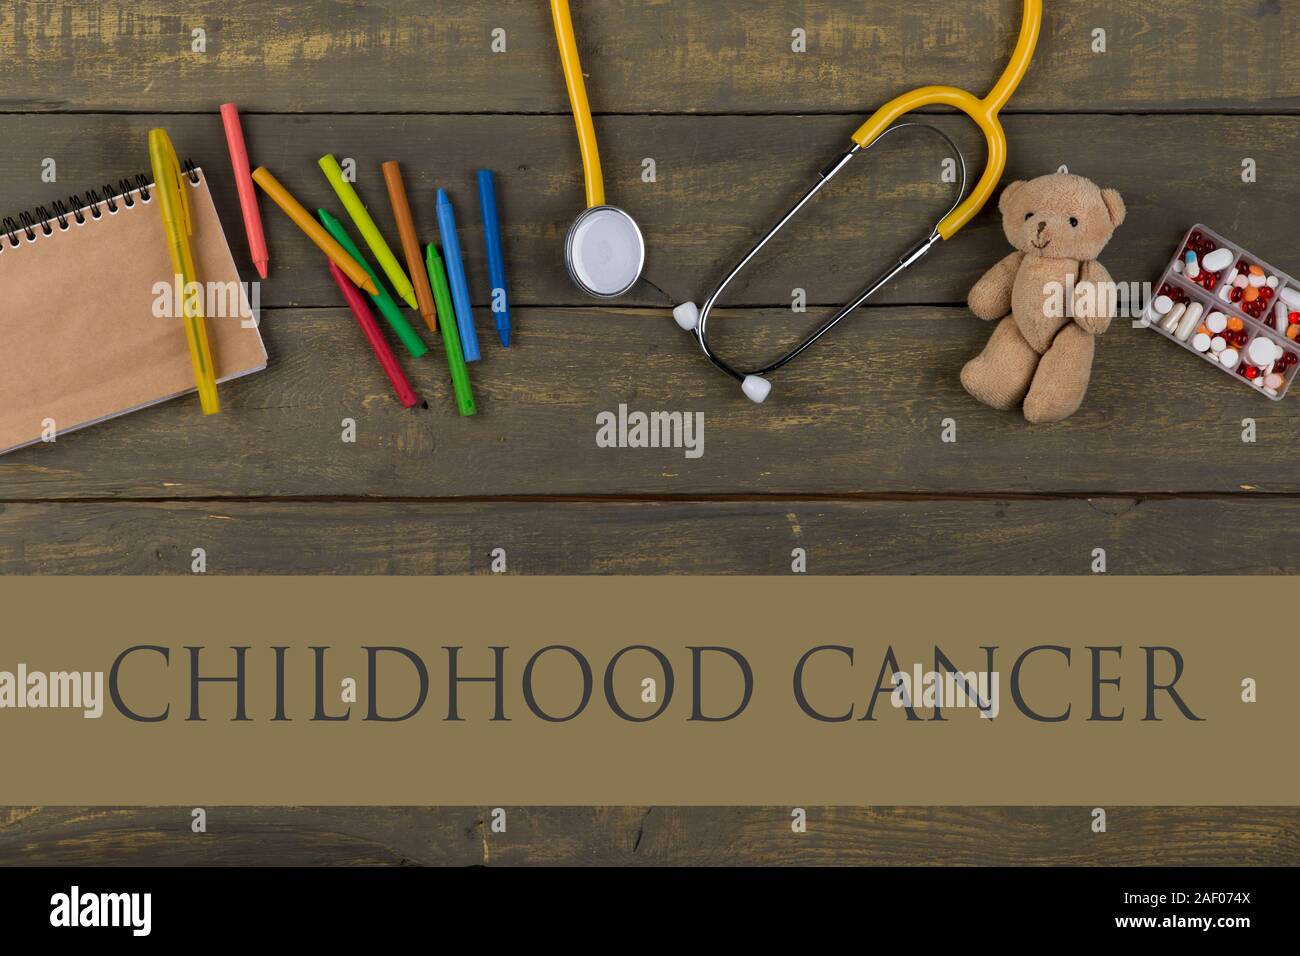 dangerous disease prevention concept - text Childhood cancer, notepad, pills, yellow stethoscope, Teddy bear toy, crayons on wooden background. Top vi Stock Photo